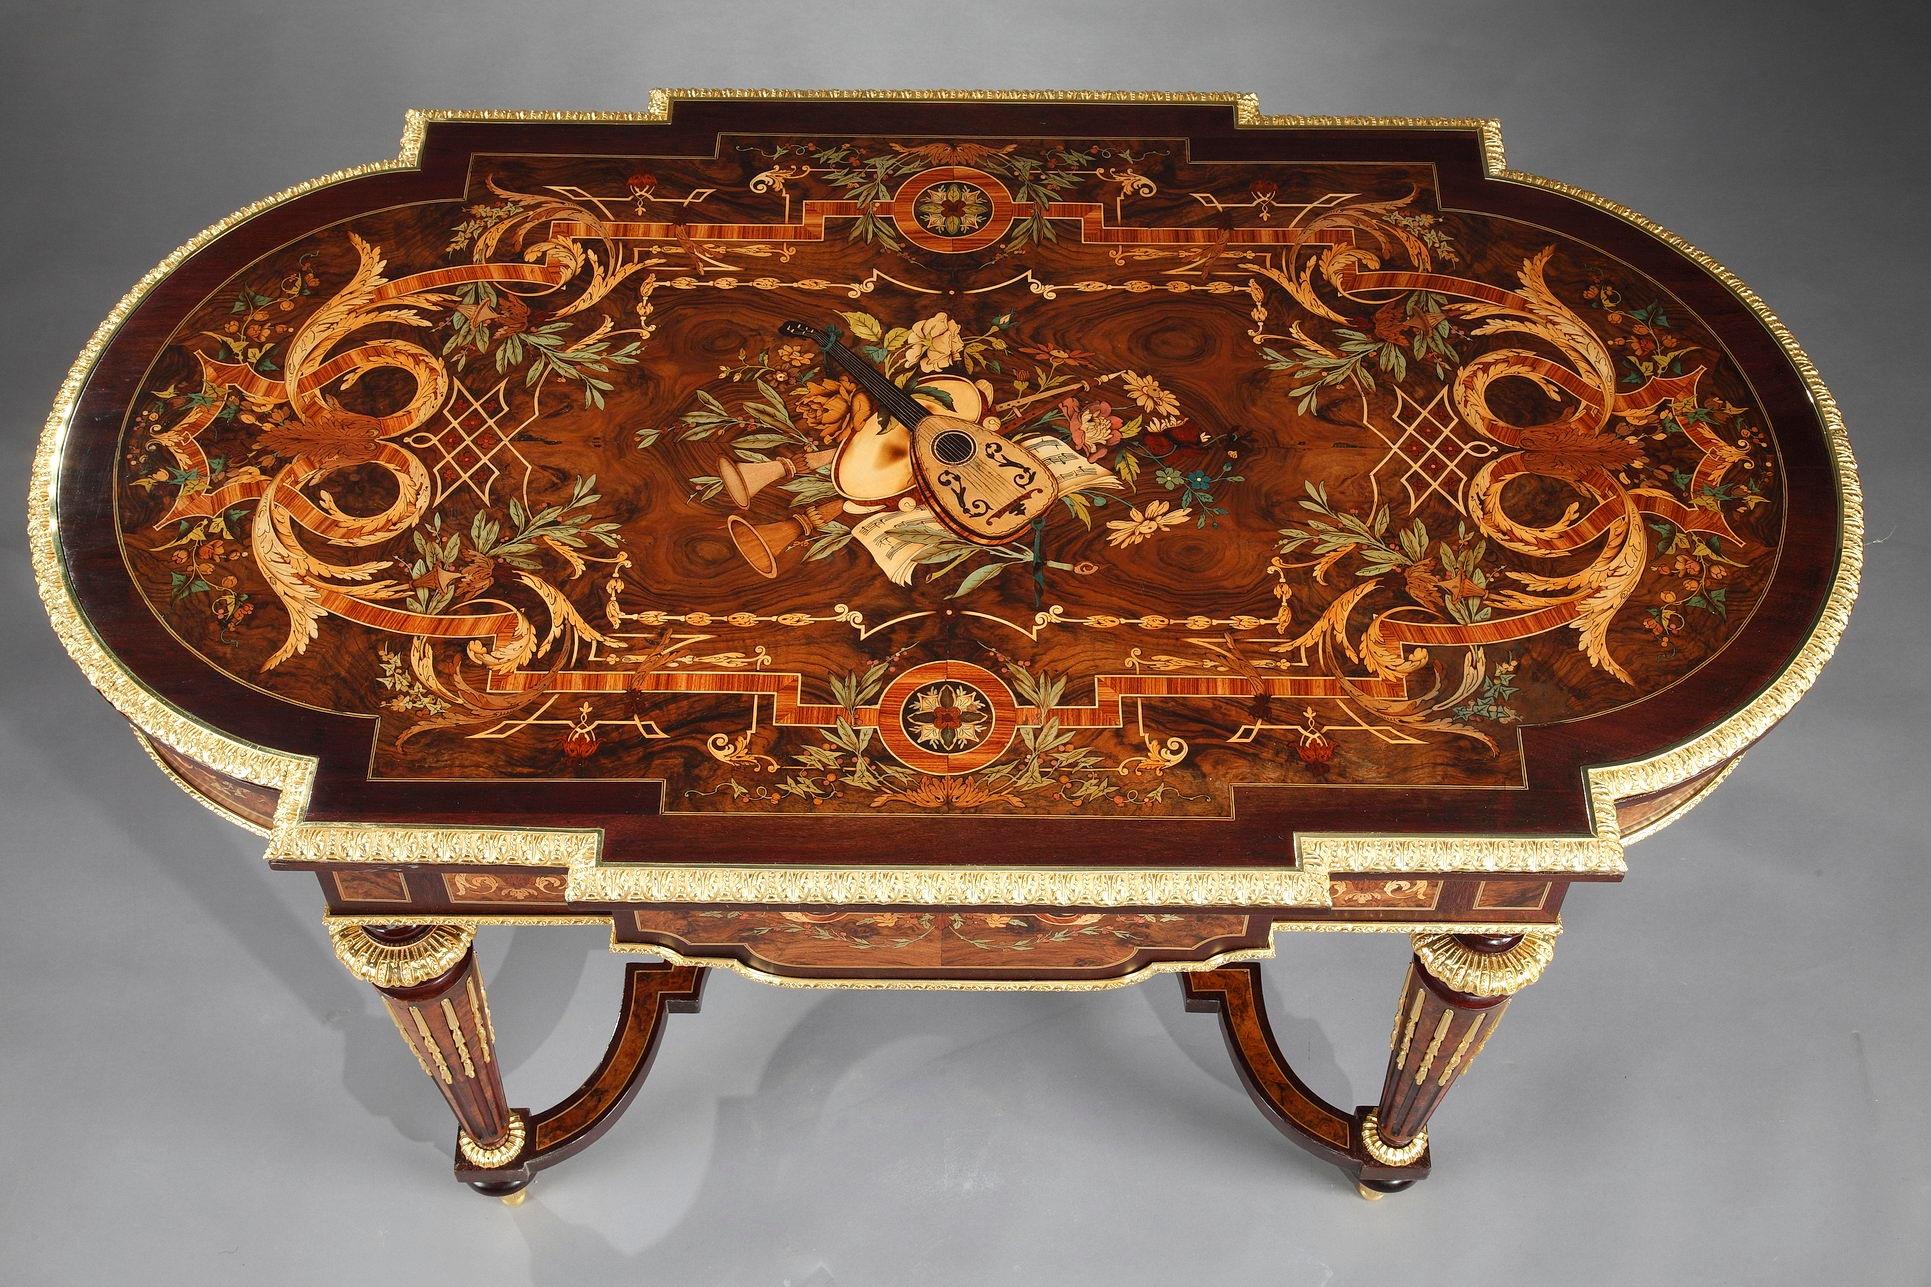 Sumptuous table in Louis XIV style, with oblong tray featuring colorful wood marquetry. The exquisit decor captures musical trophie framed by a border of foliated rinceau, interlace and floral pattern. It opens by a large front drawer, and rests on